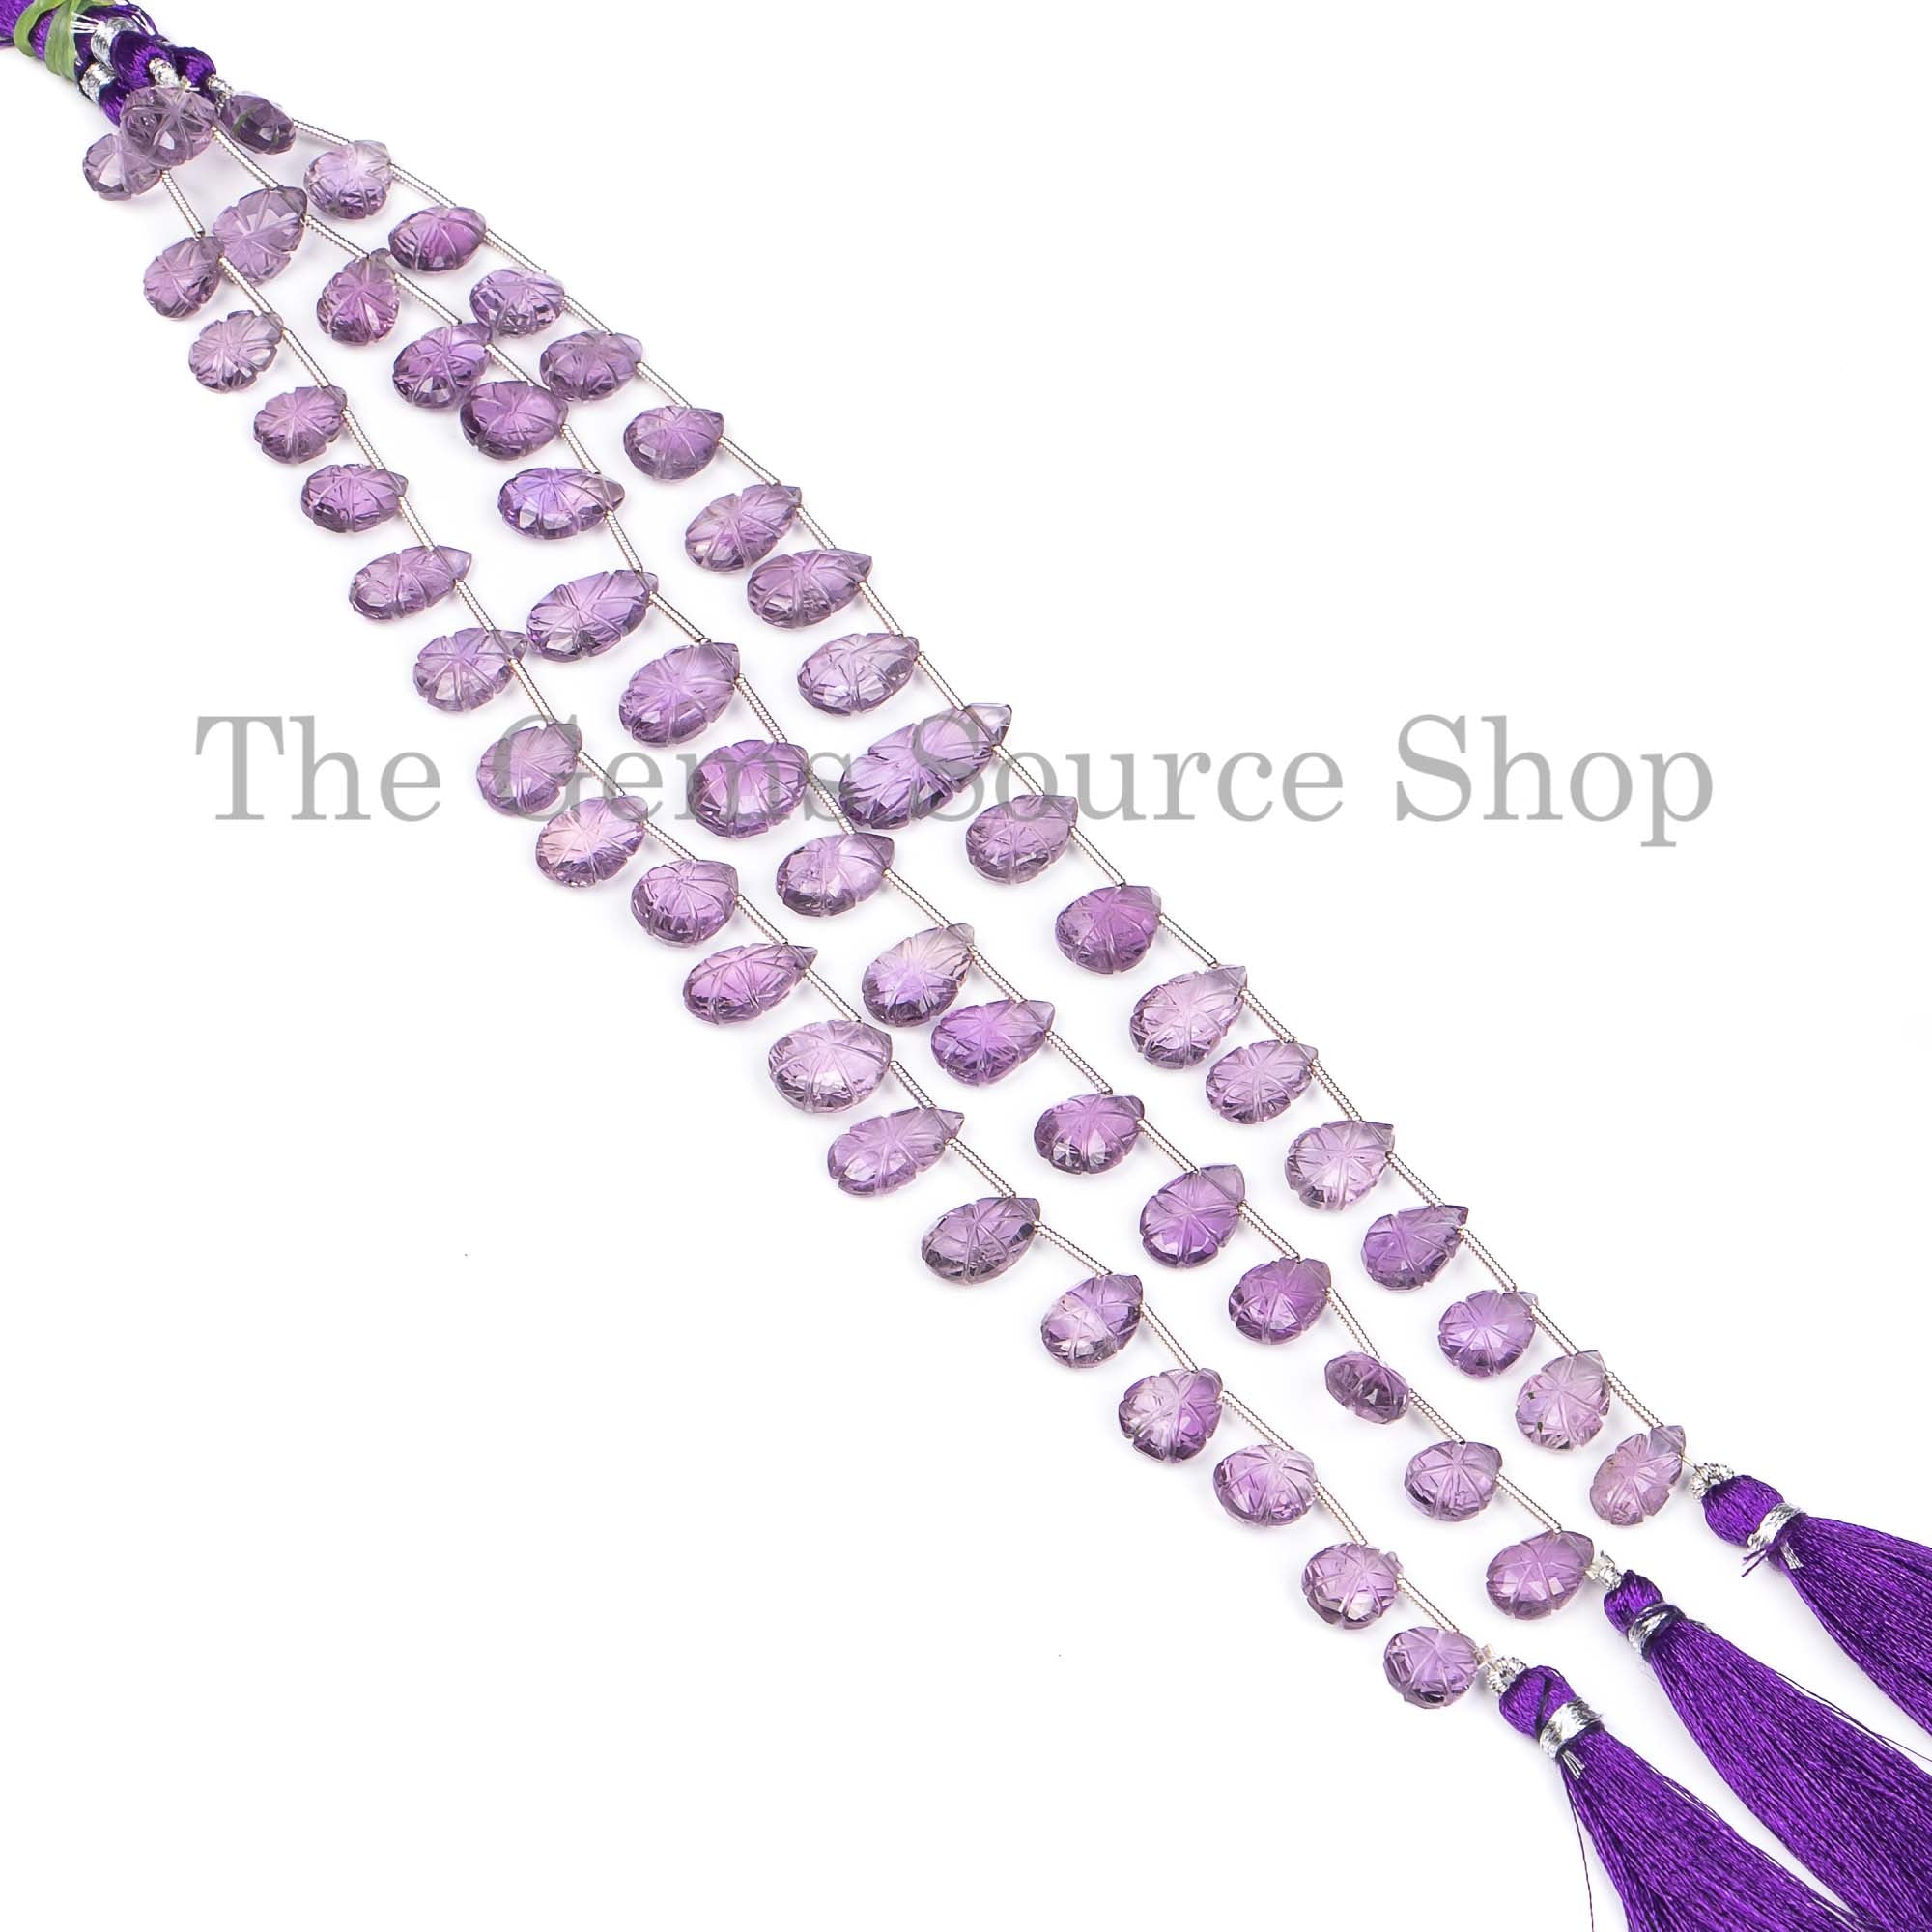 Extremely Rare Amethyst Pear Flower Carving Beads, Amethyst Flower Beads